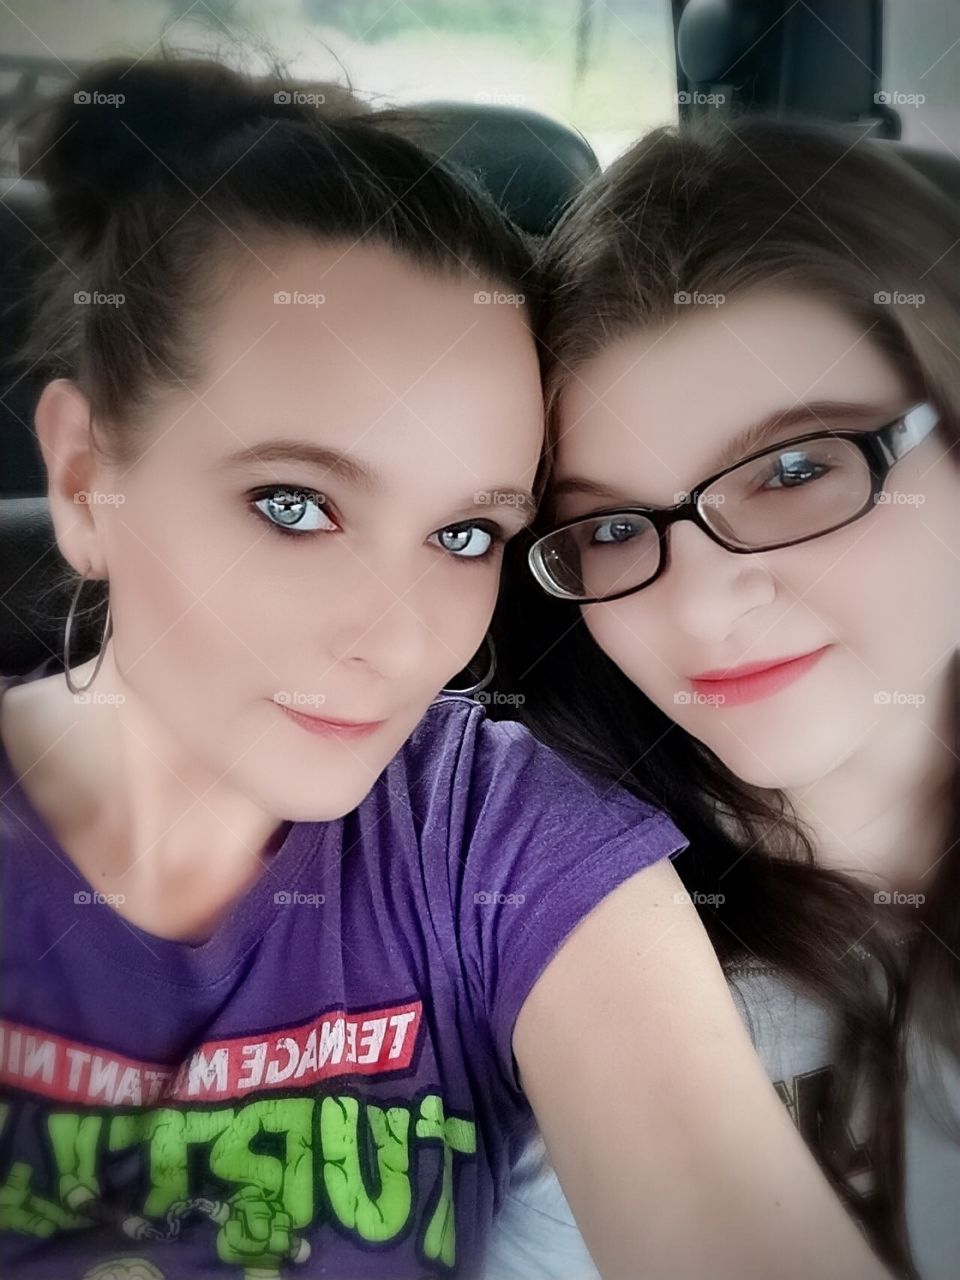 I’m happiest as long as I have my babies! This is my oldest, my sweet Angel that is now 16 years old and is her mommy’s best friend!! I am so very proud of the young lady that my babygirl has become and I absolutely love her with all of my heart!